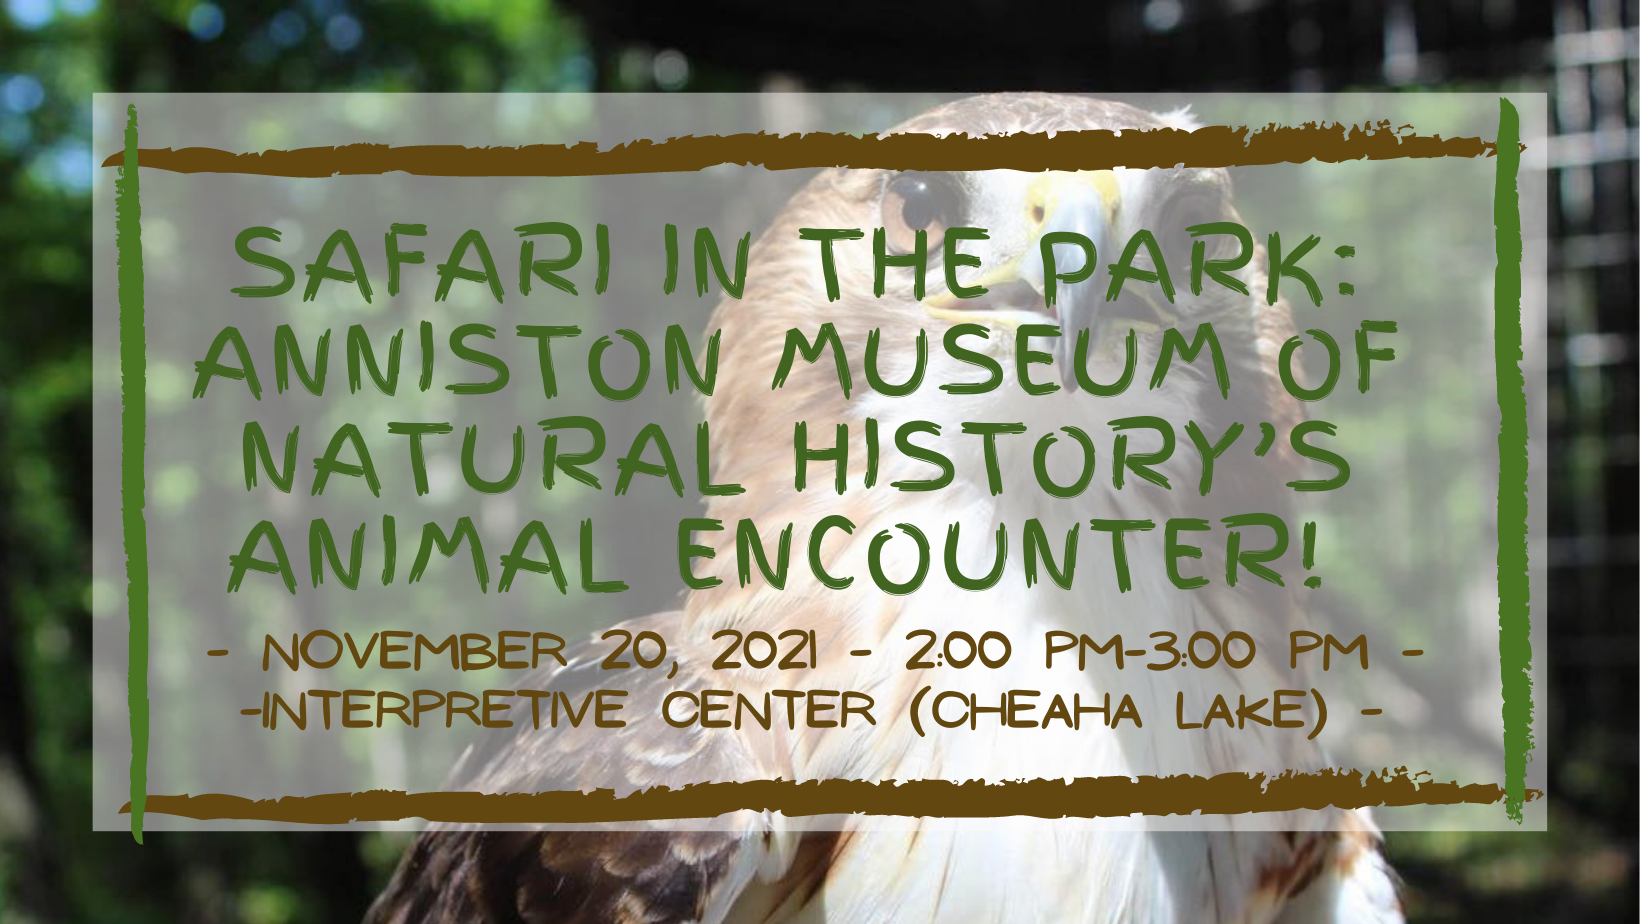 CSP 2021SAFARI IN THE PARK: Anniston Museum of Natural History’s Animal Encounter!